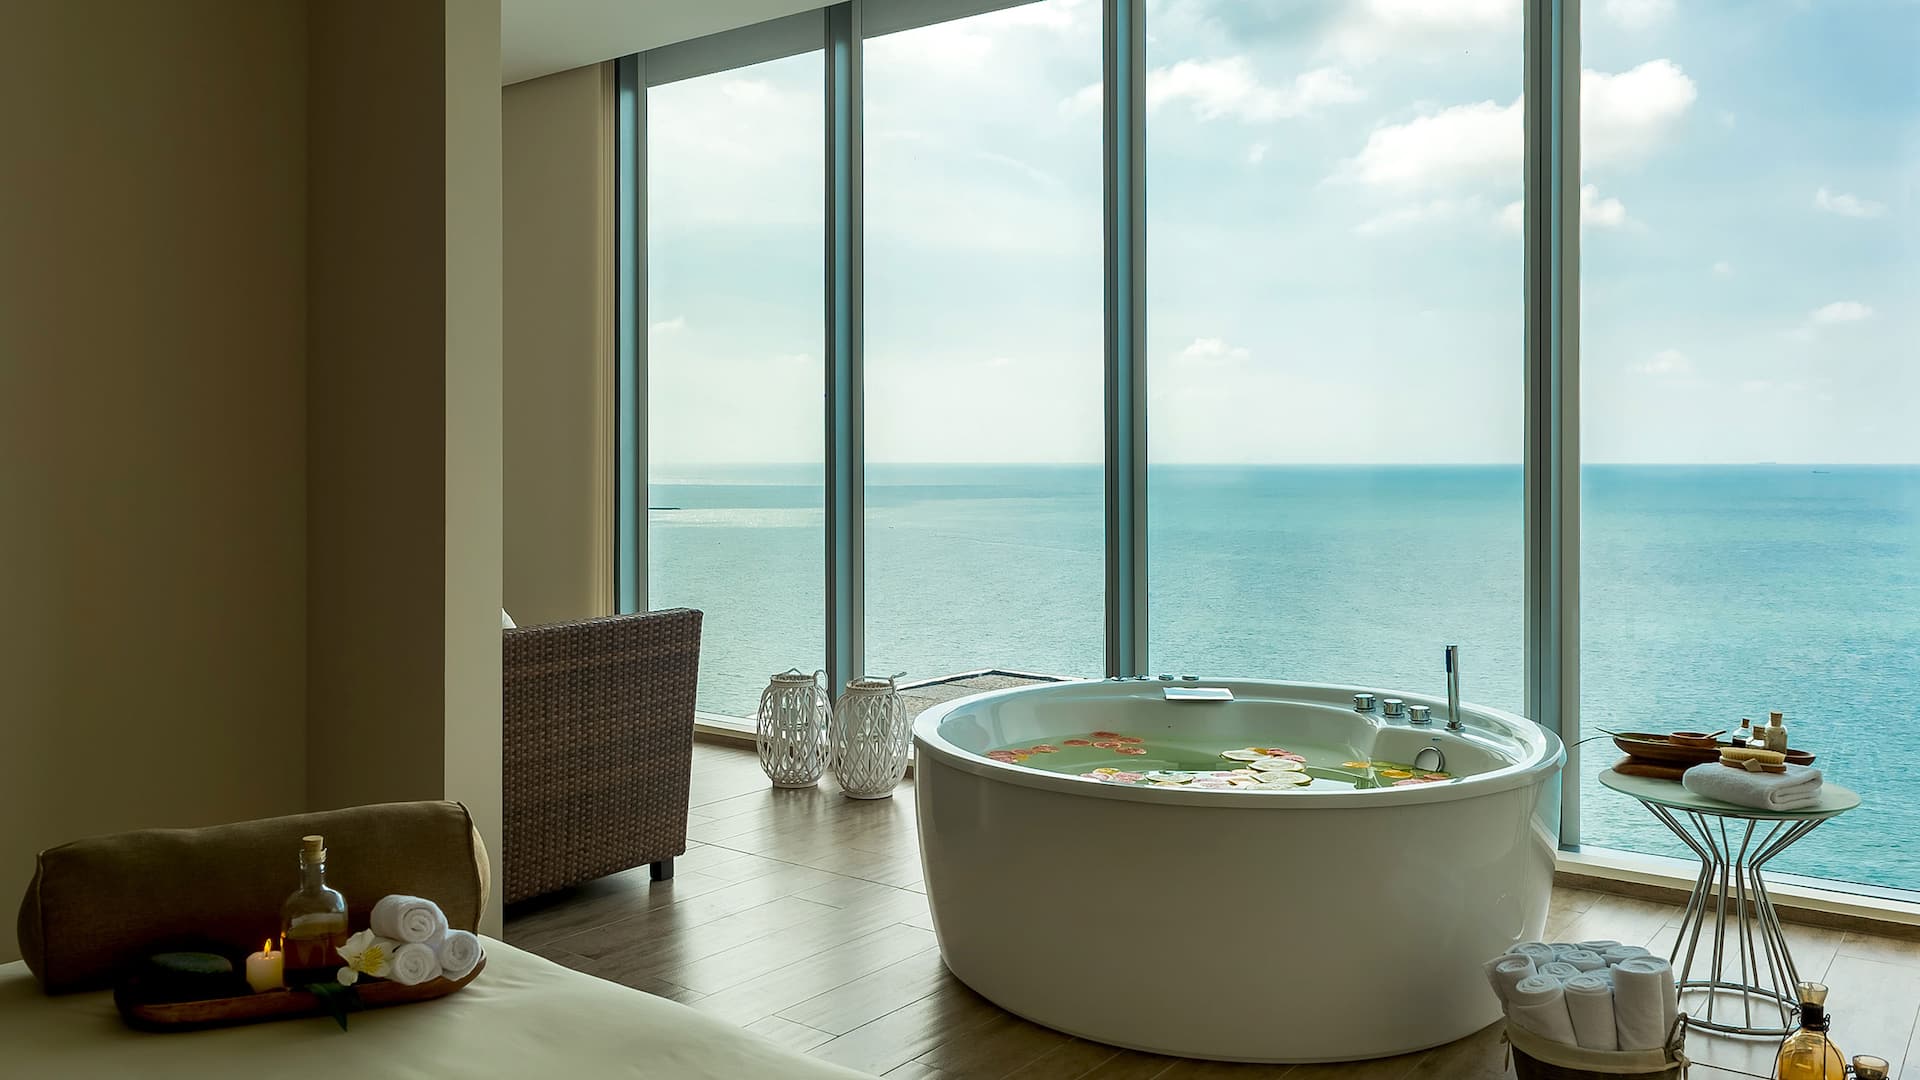 daylight spa with ocean view in cartagena colombia